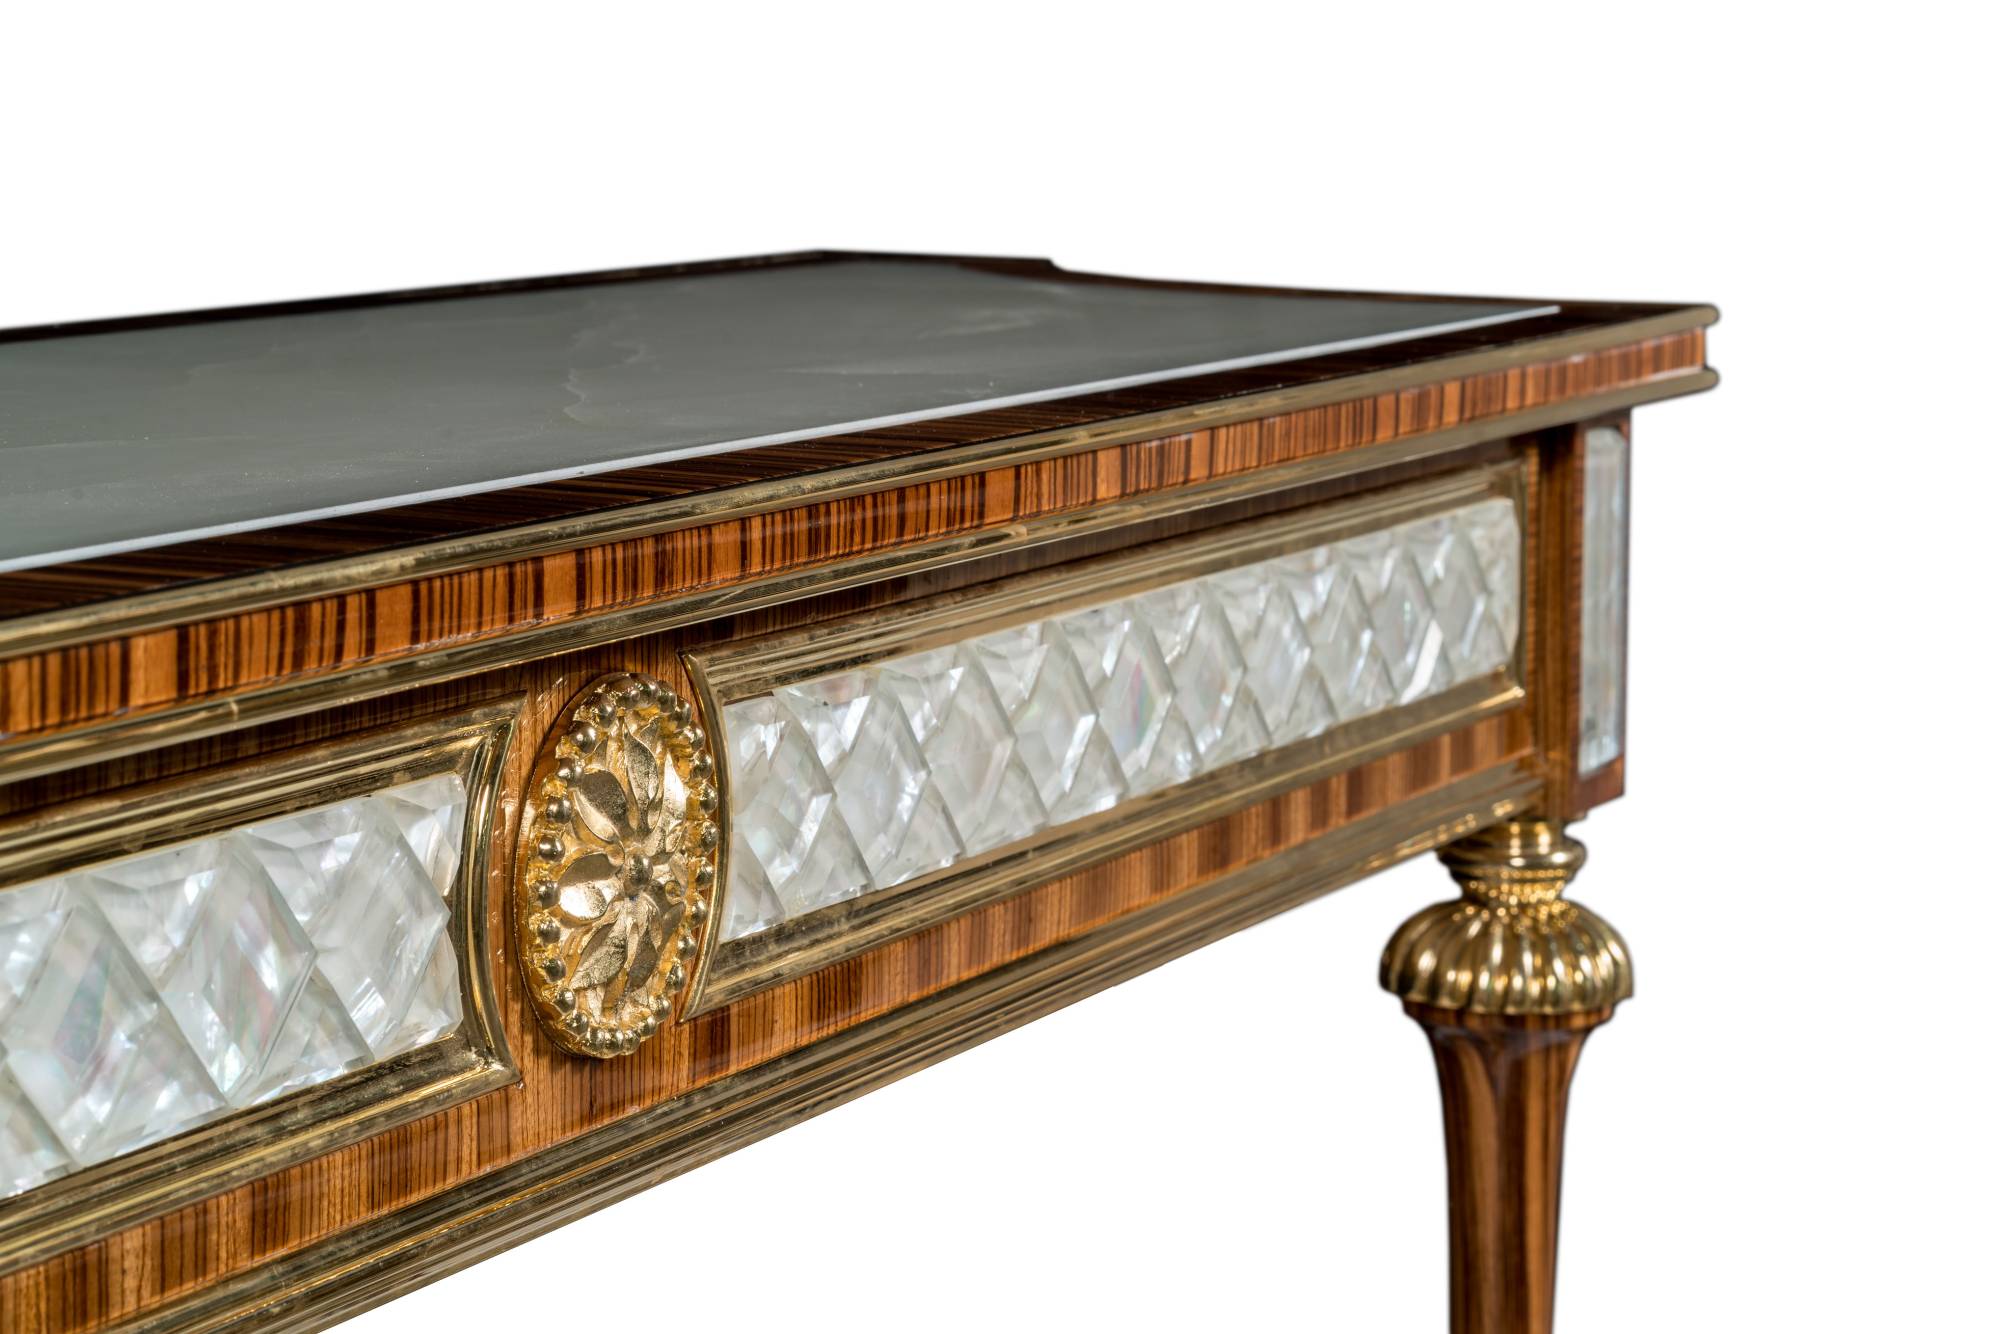 ART. 2081 – The elegance of luxury classic Console made in Italy by C.G. Capelletti.